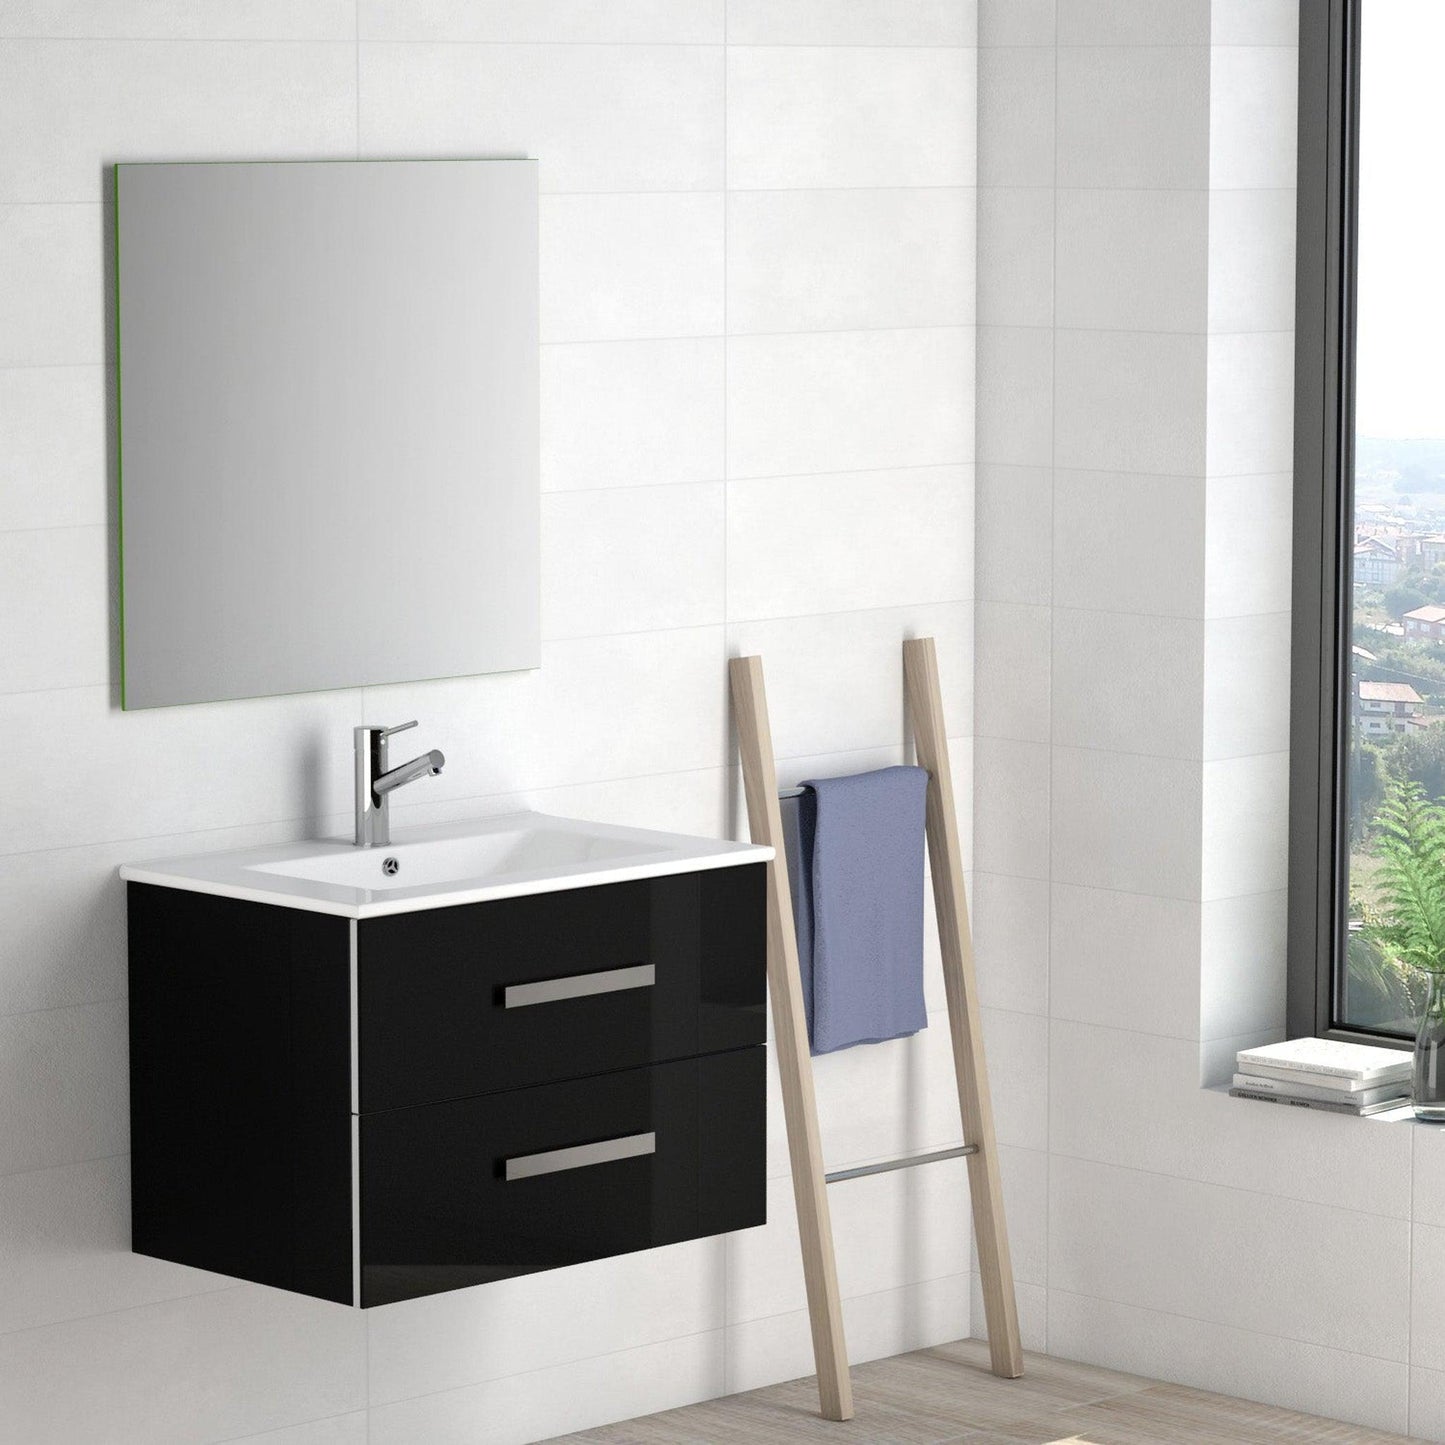 Eviva Astoria 28” x 25” Black Wall-Mounted Bathroom Vanity With White Integrated Porcelain Sink